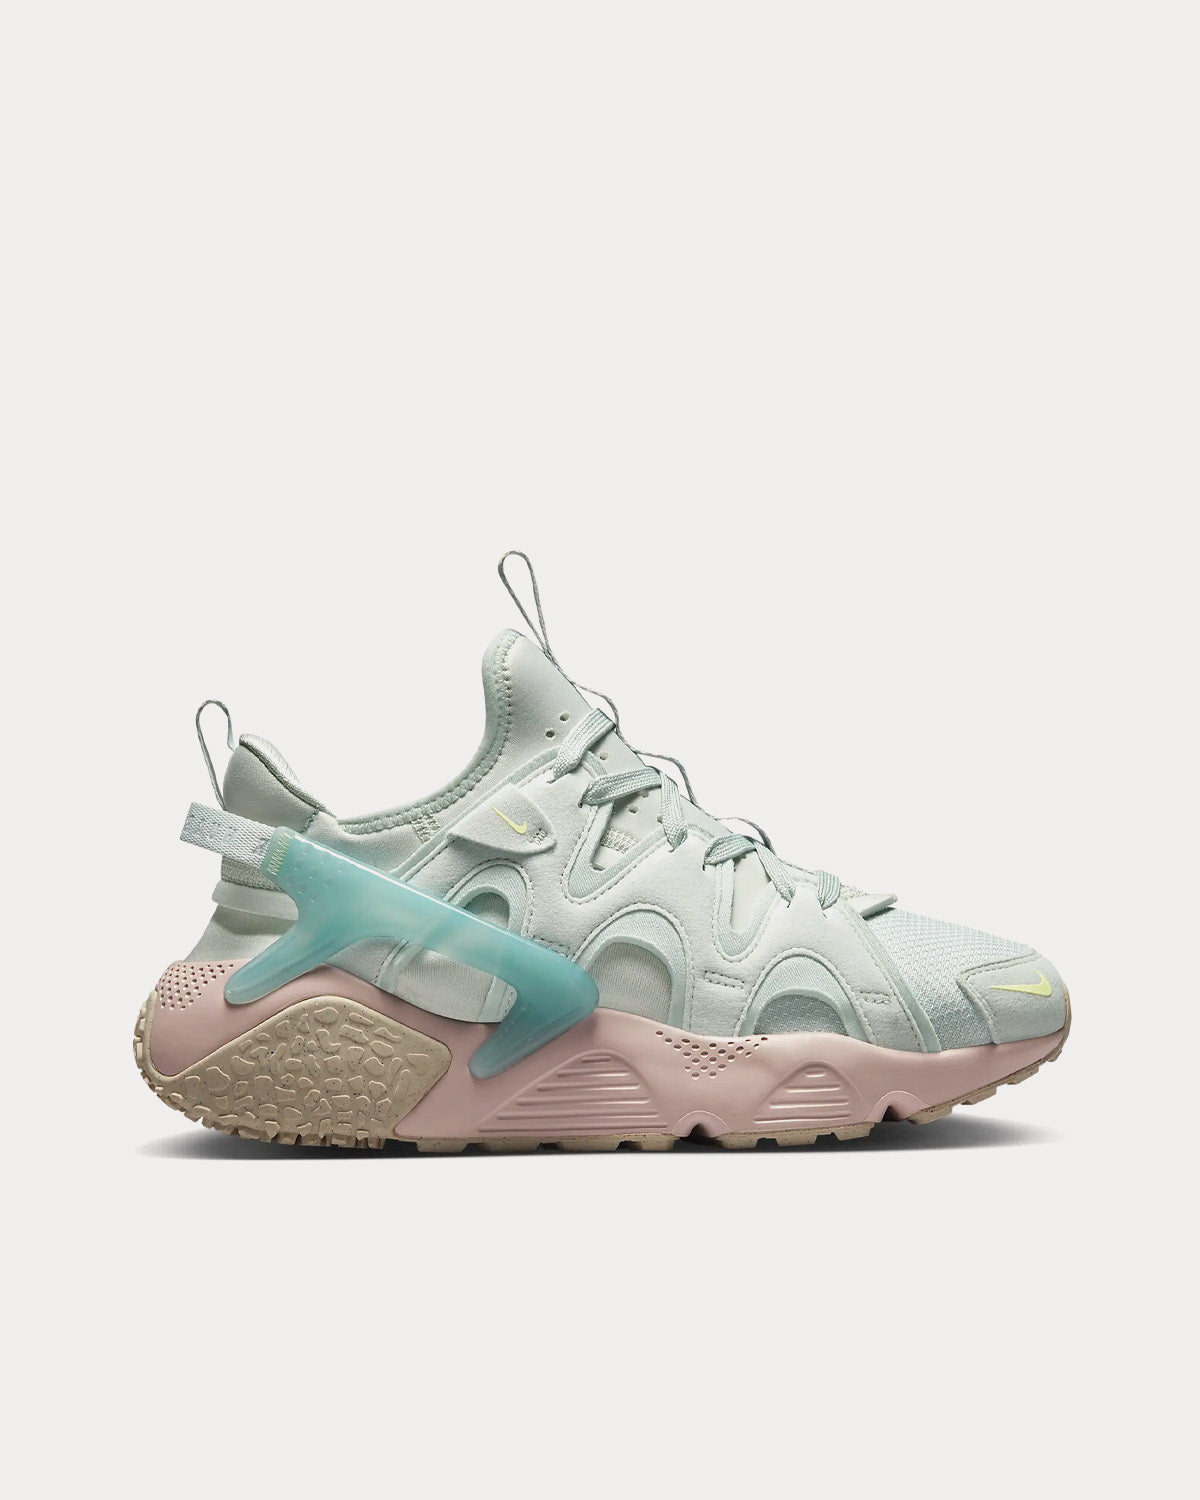 Nike Air Craft Light Silver / Ocean Bliss Pink Oxford / Citron Tint Low Top Sneakers - Sneak Peace